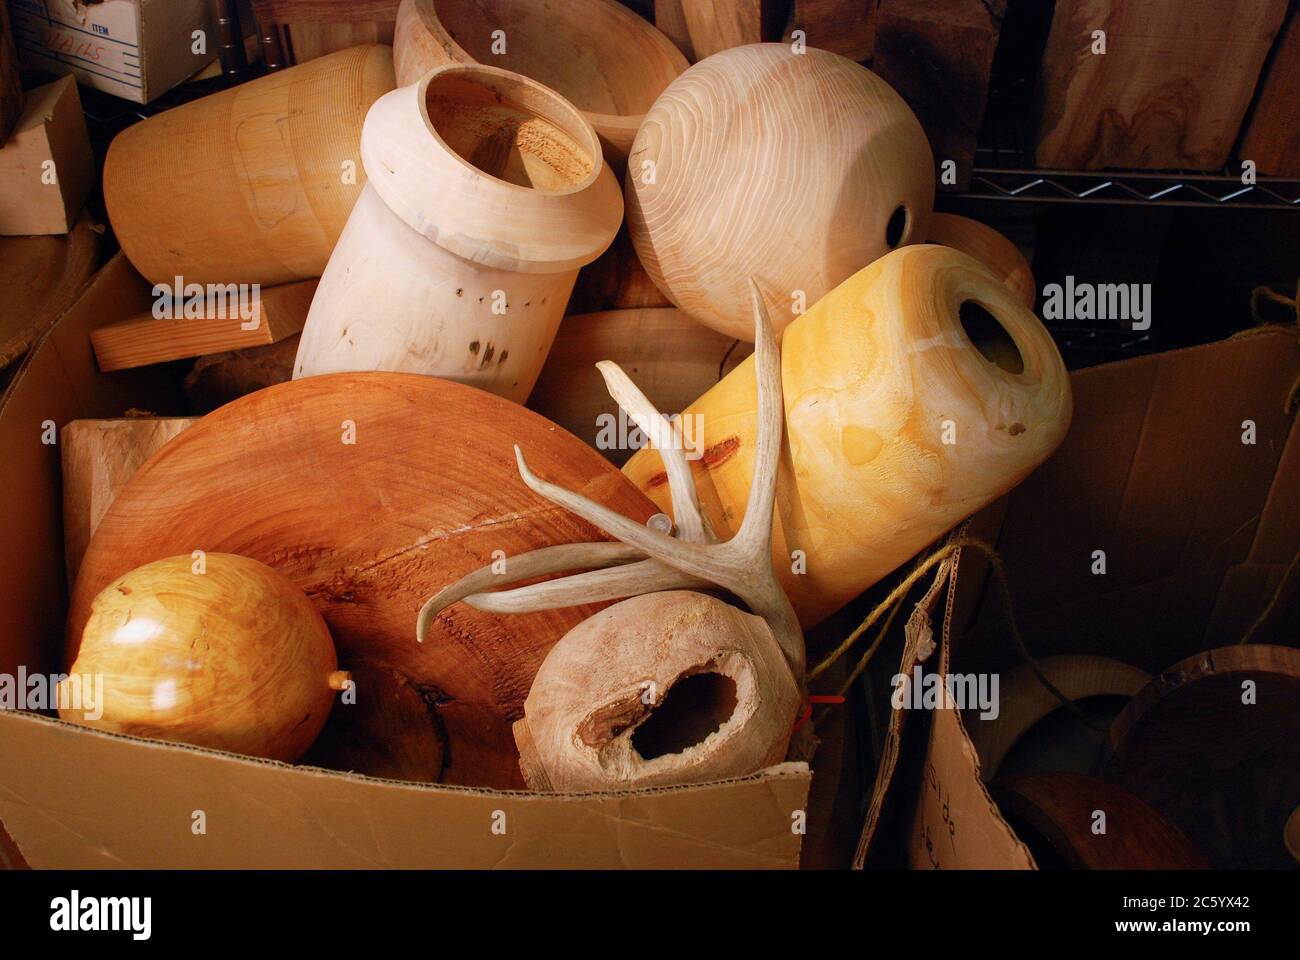 A bin filled with wooden objects Stock Photo